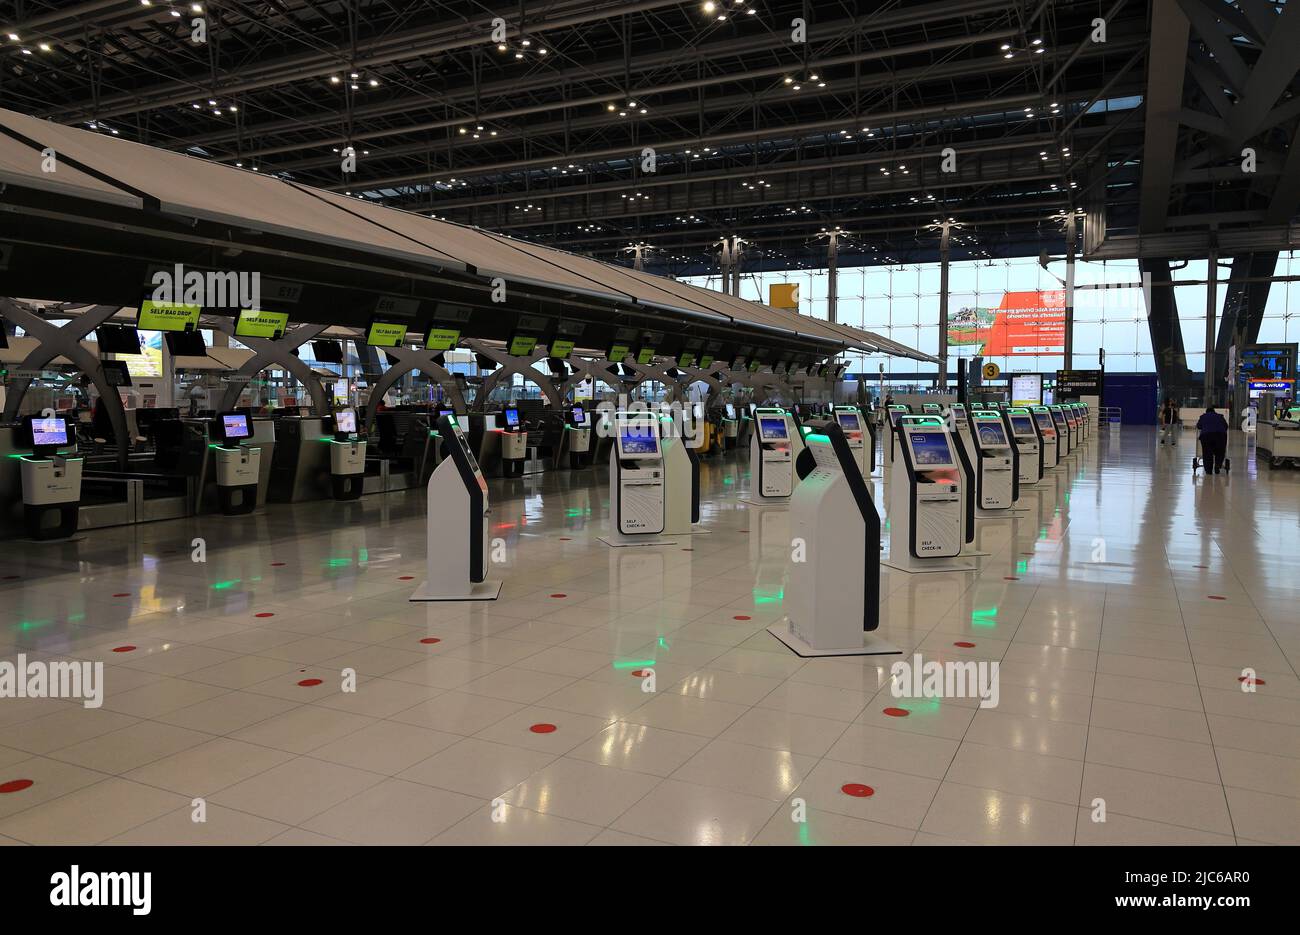 Self Check-in or Self service machine and help desk kiosk at airport for check in, printing boarding pass or buying ticket. Stock Photo